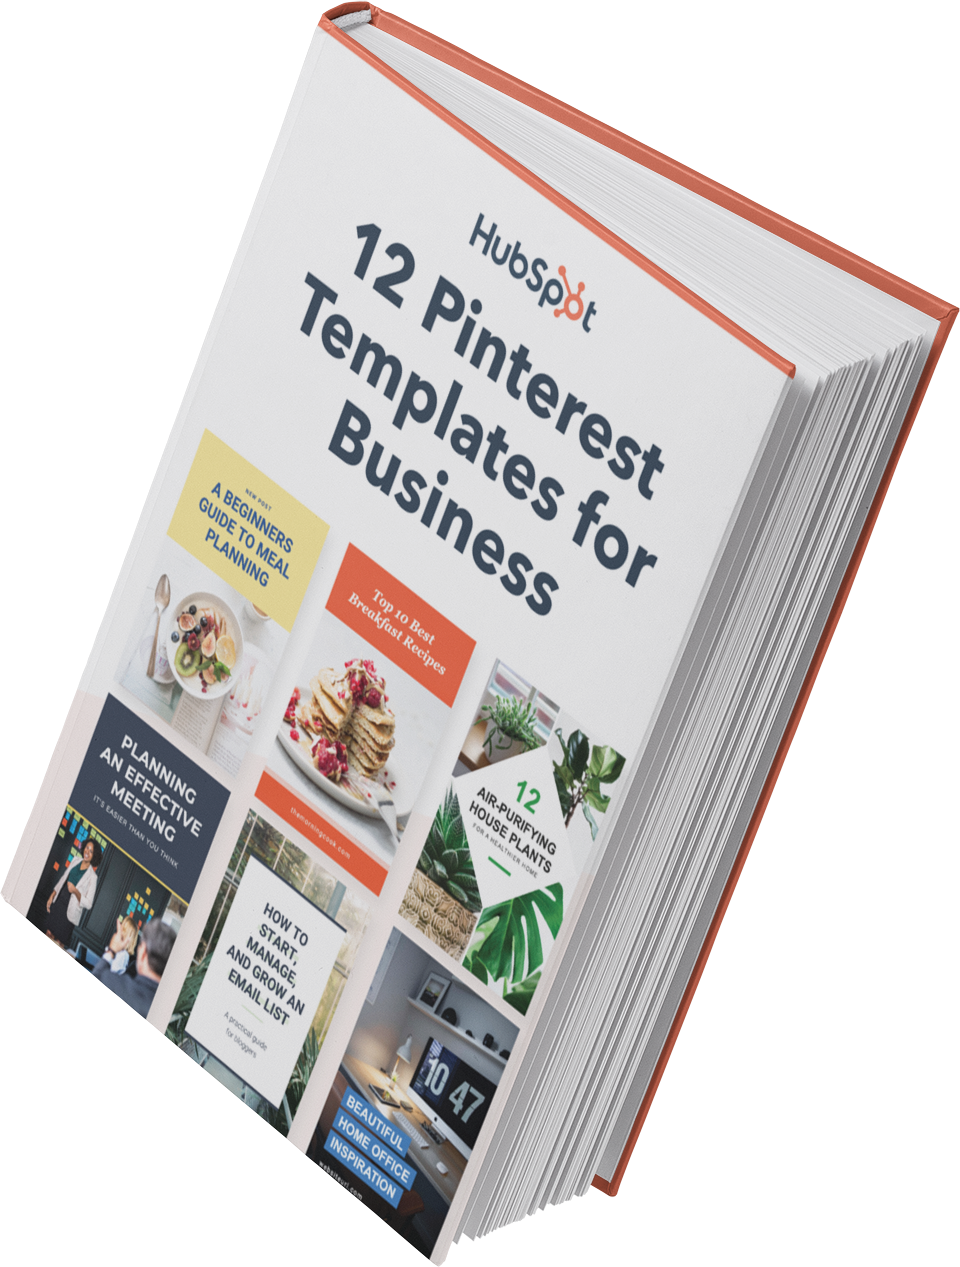 Free Download 12 Pinterest Templates For Business